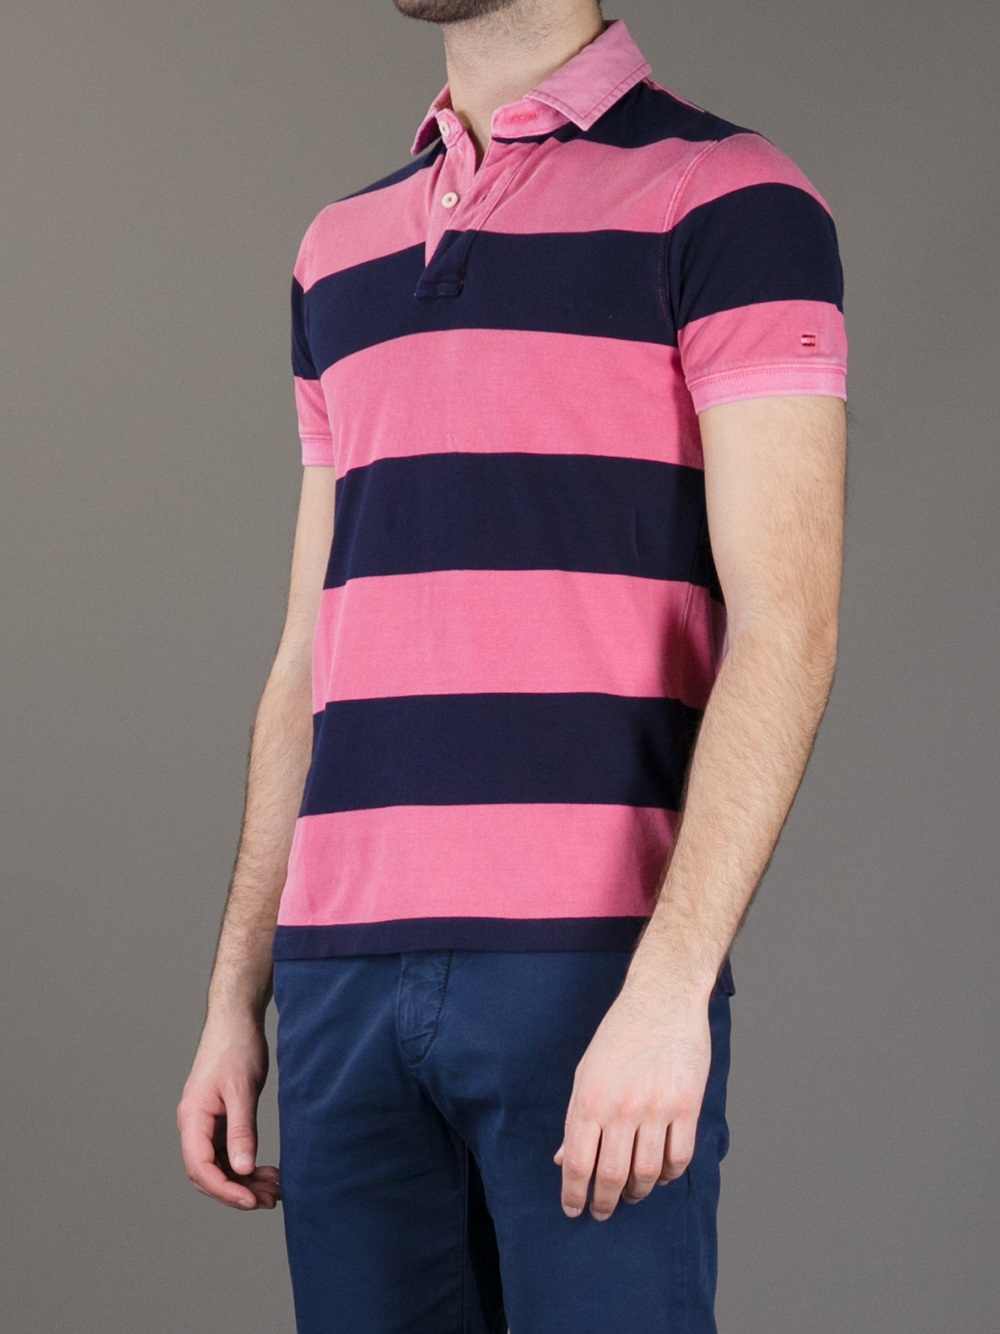 Tommy Hilfiger Striped Polo Shirt in Blue (Pink) for Men - Lyst